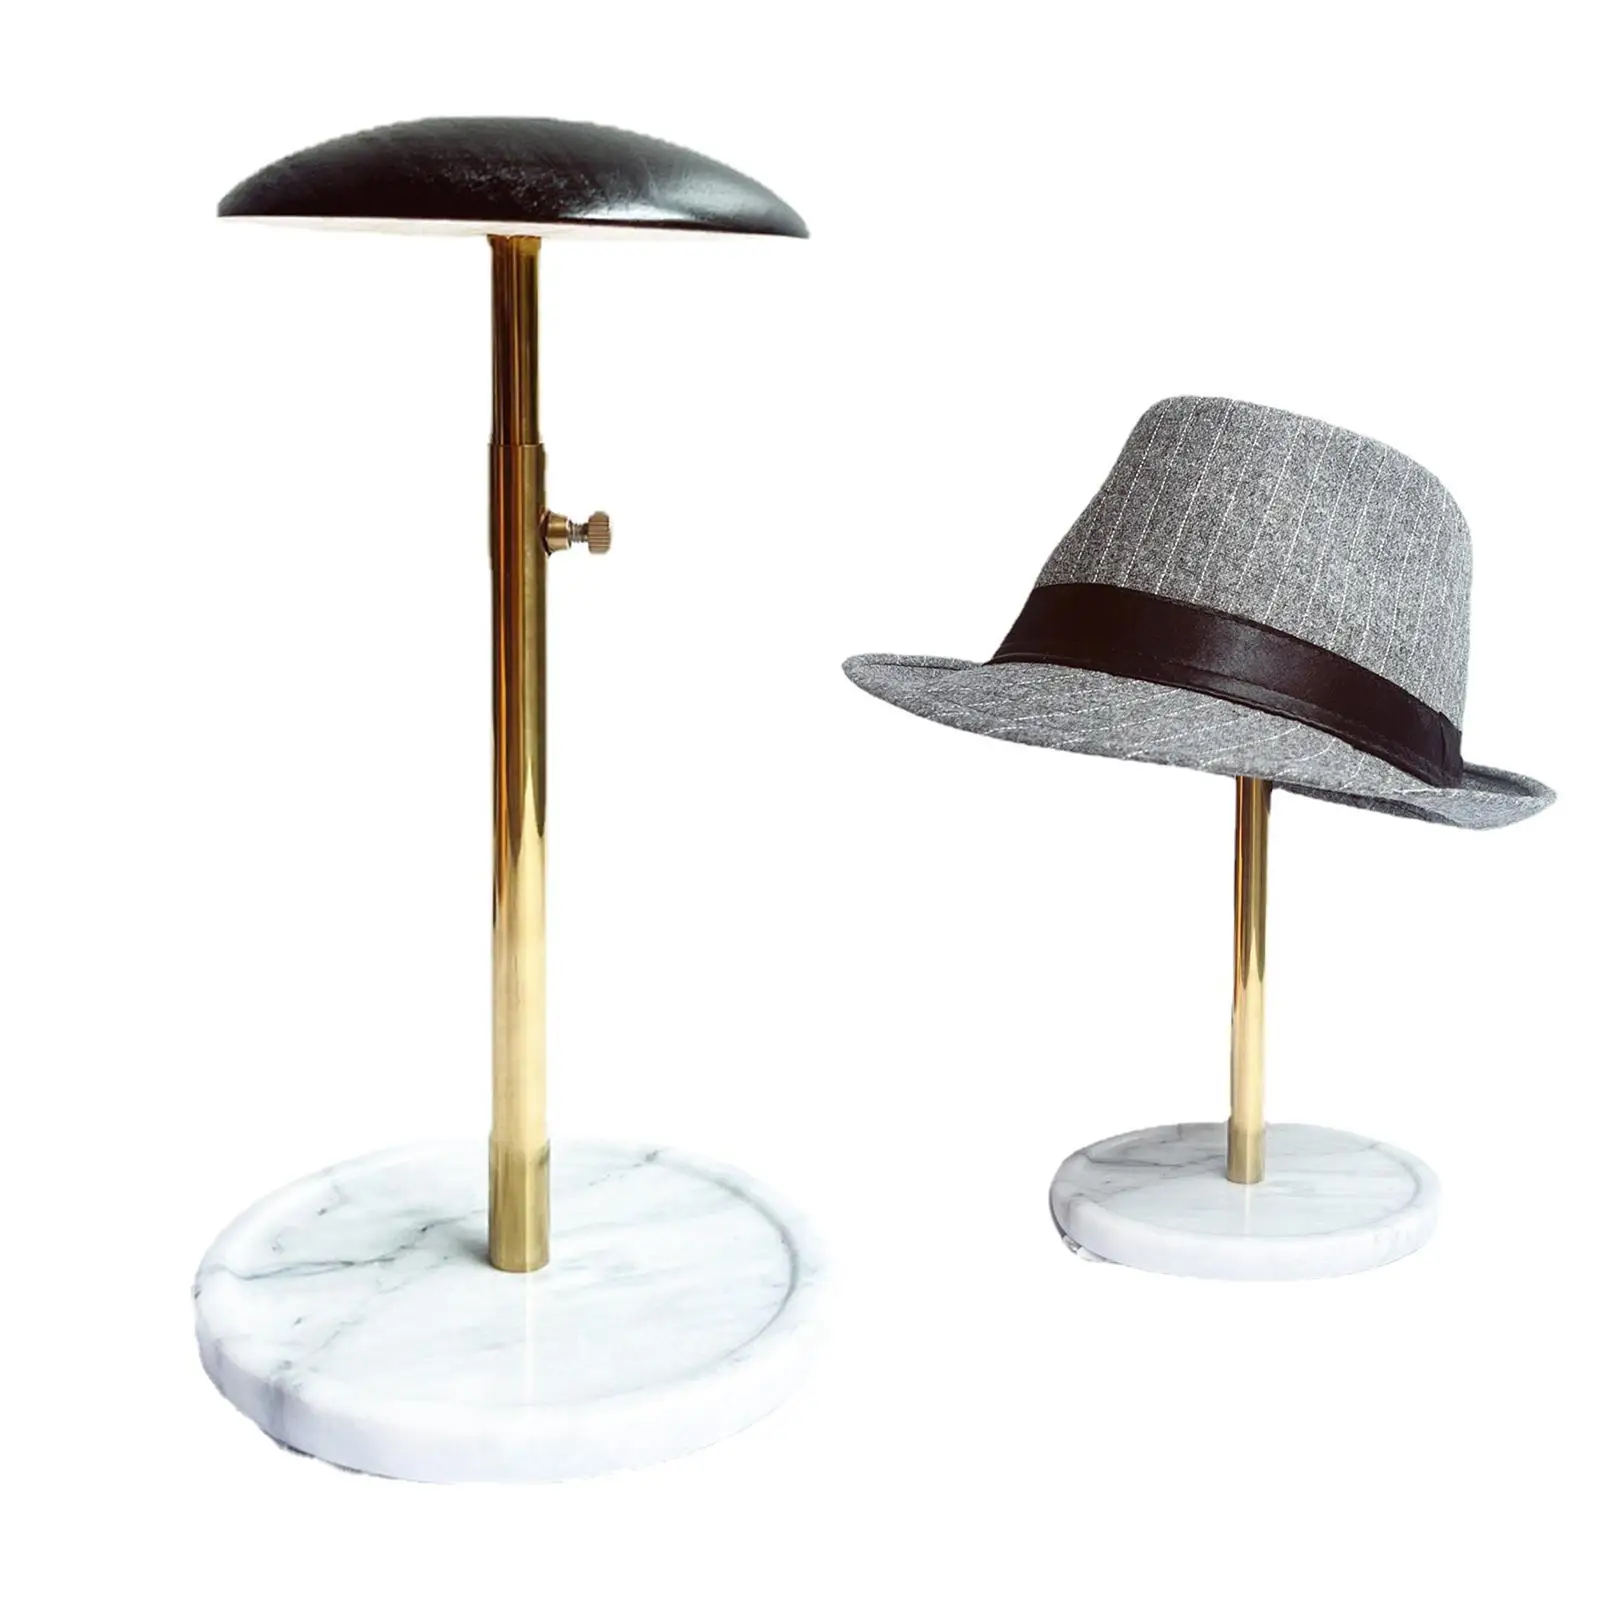 Portable Hat Display Stand, Wig Stand, Wood Holder, Non- Creative Storage Rack, Home Barber Shop Styling Hat Head Stand